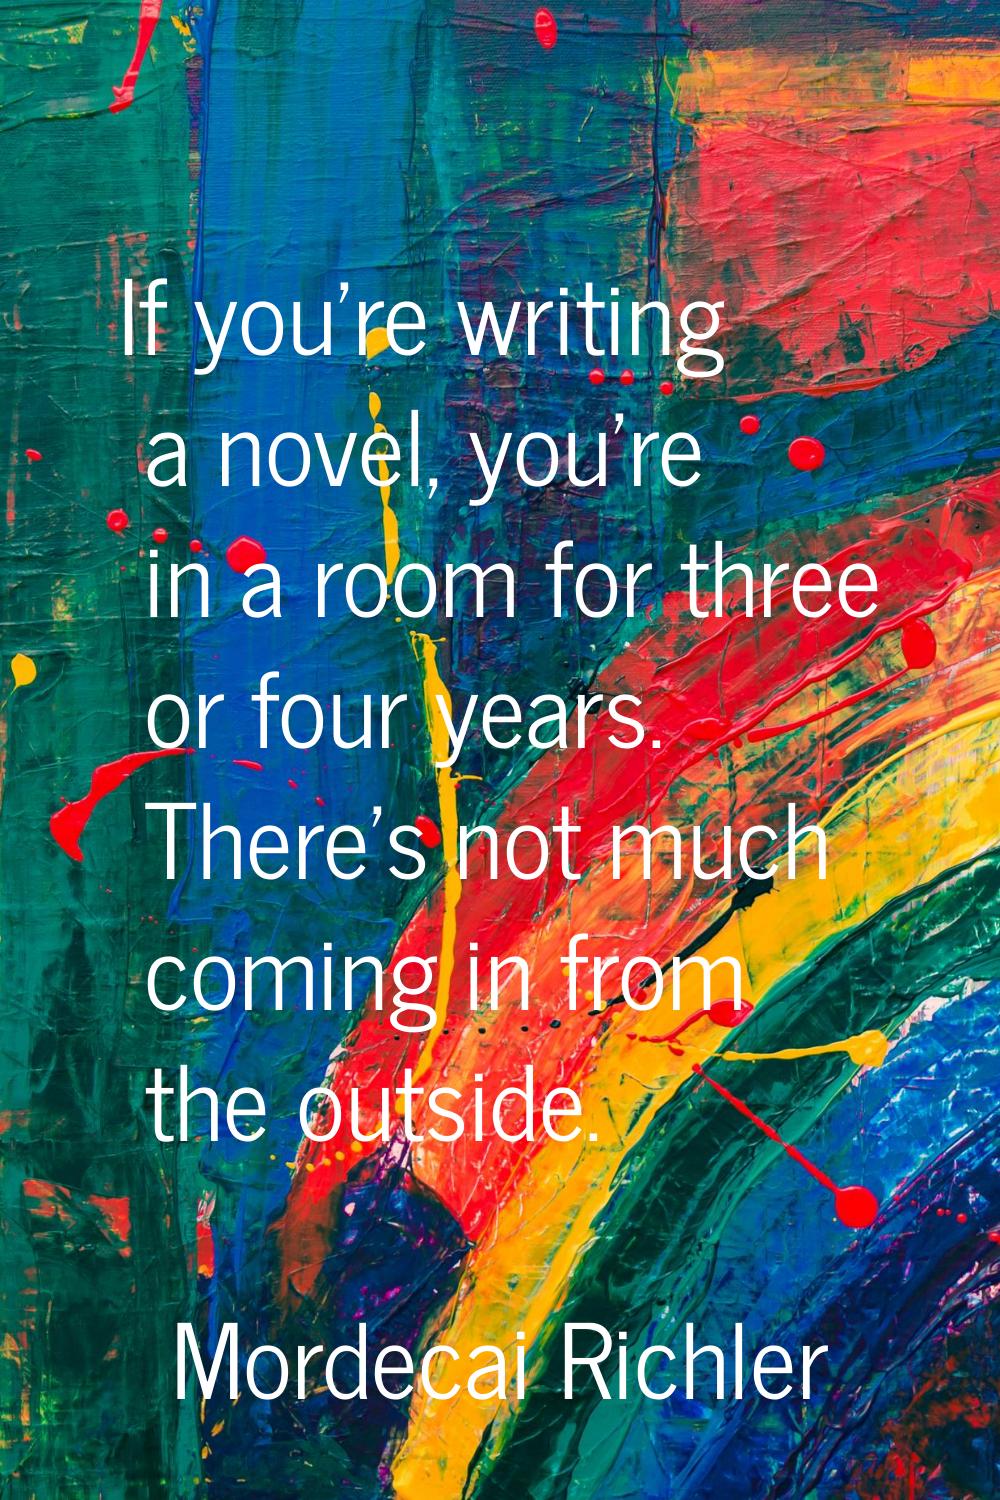 If you're writing a novel, you're in a room for three or four years. There's not much coming in fro